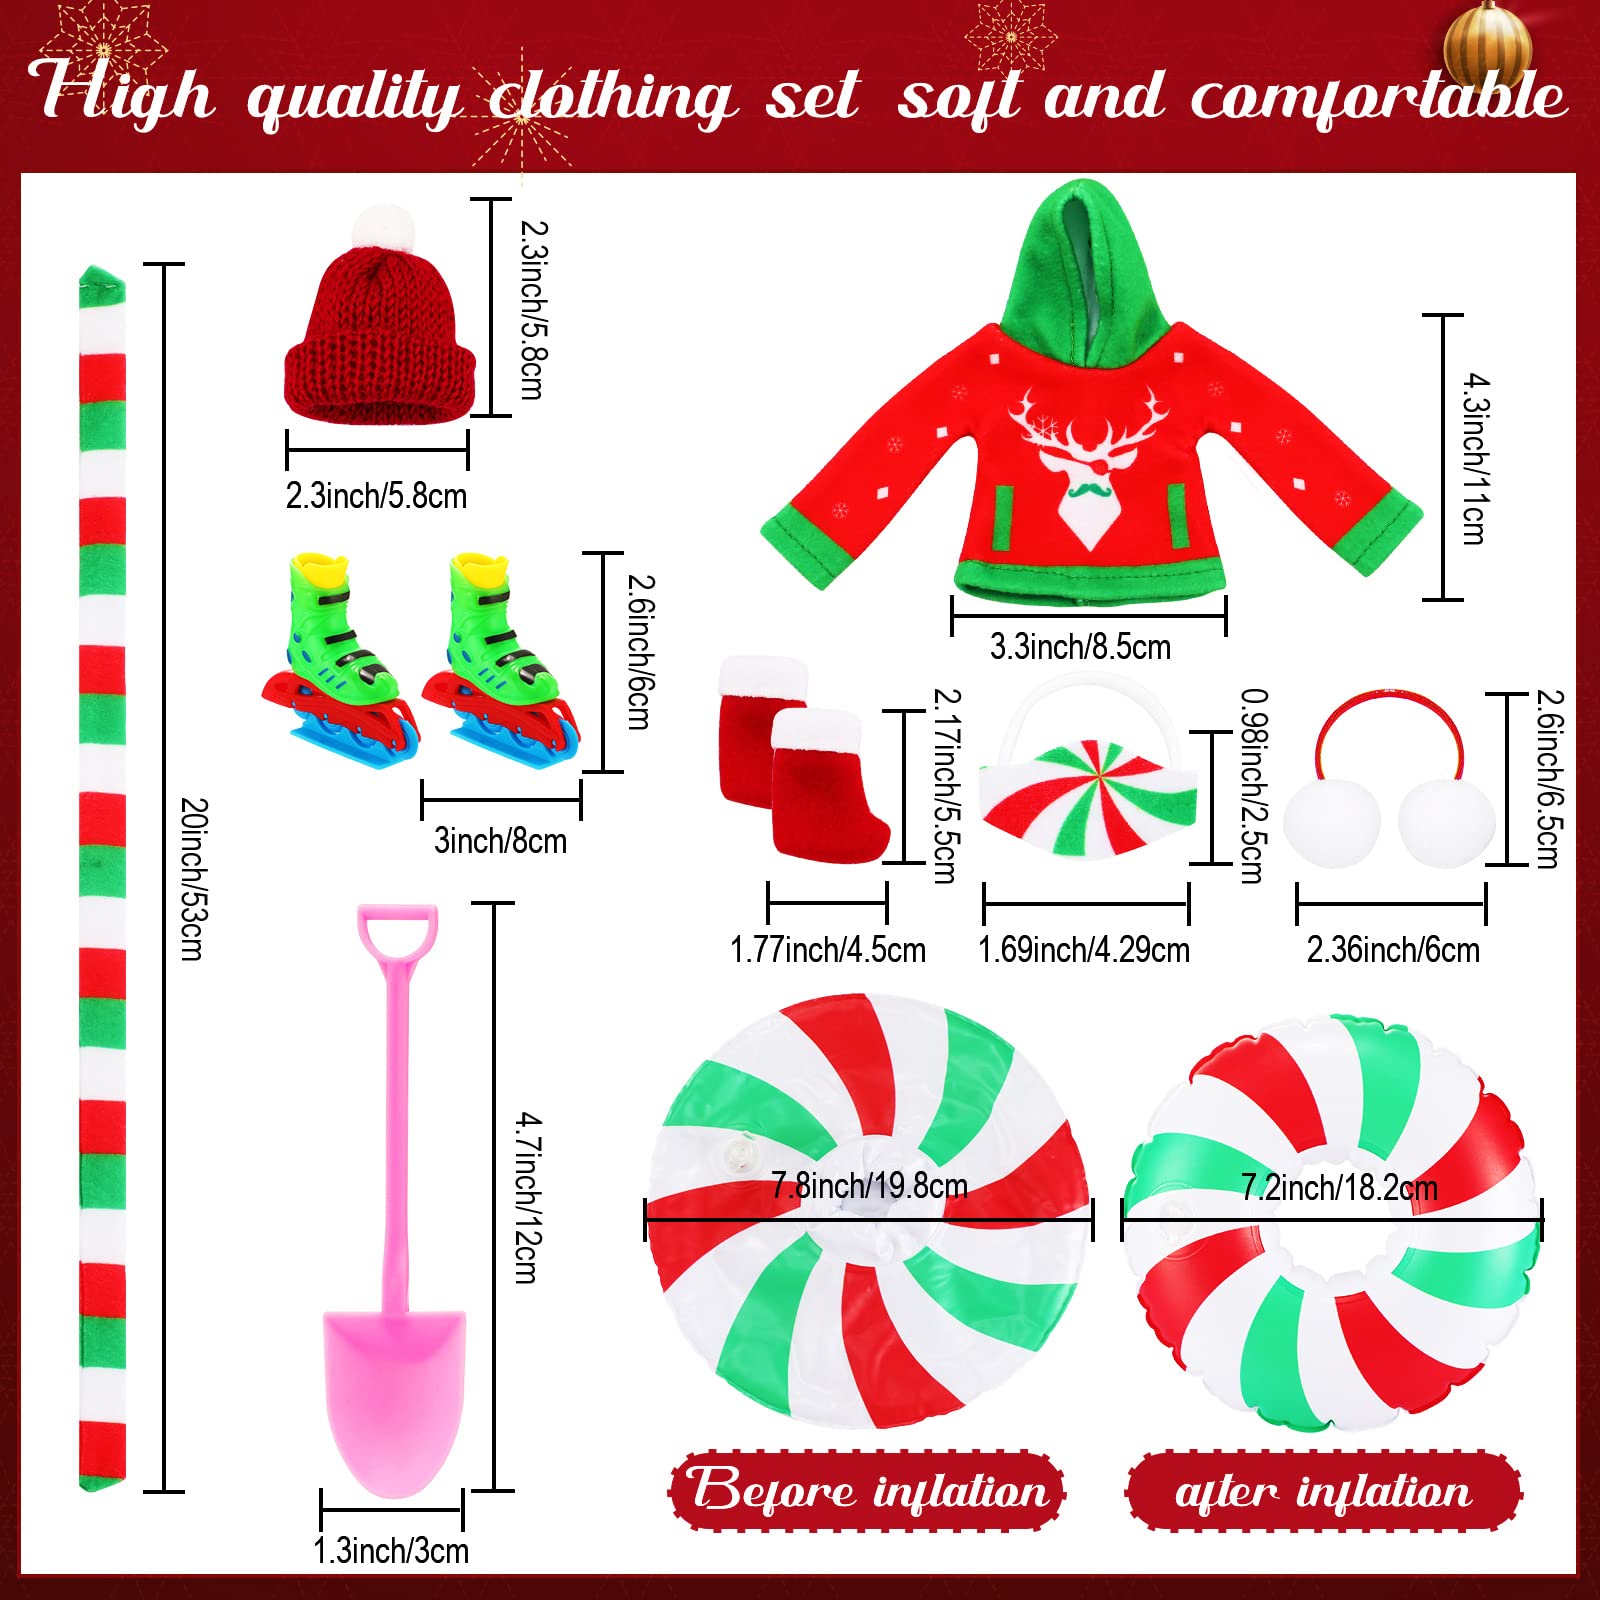 9PCS Christmas Elf Doll Accessories Set Santa Couture Clothing Includes Ear Muffs, Scarf, Sweater, Boot, Inflatable Snow Tube, Mask, Hat, Ice Skates, Shovel for Elf Doll Decor (Sweater)